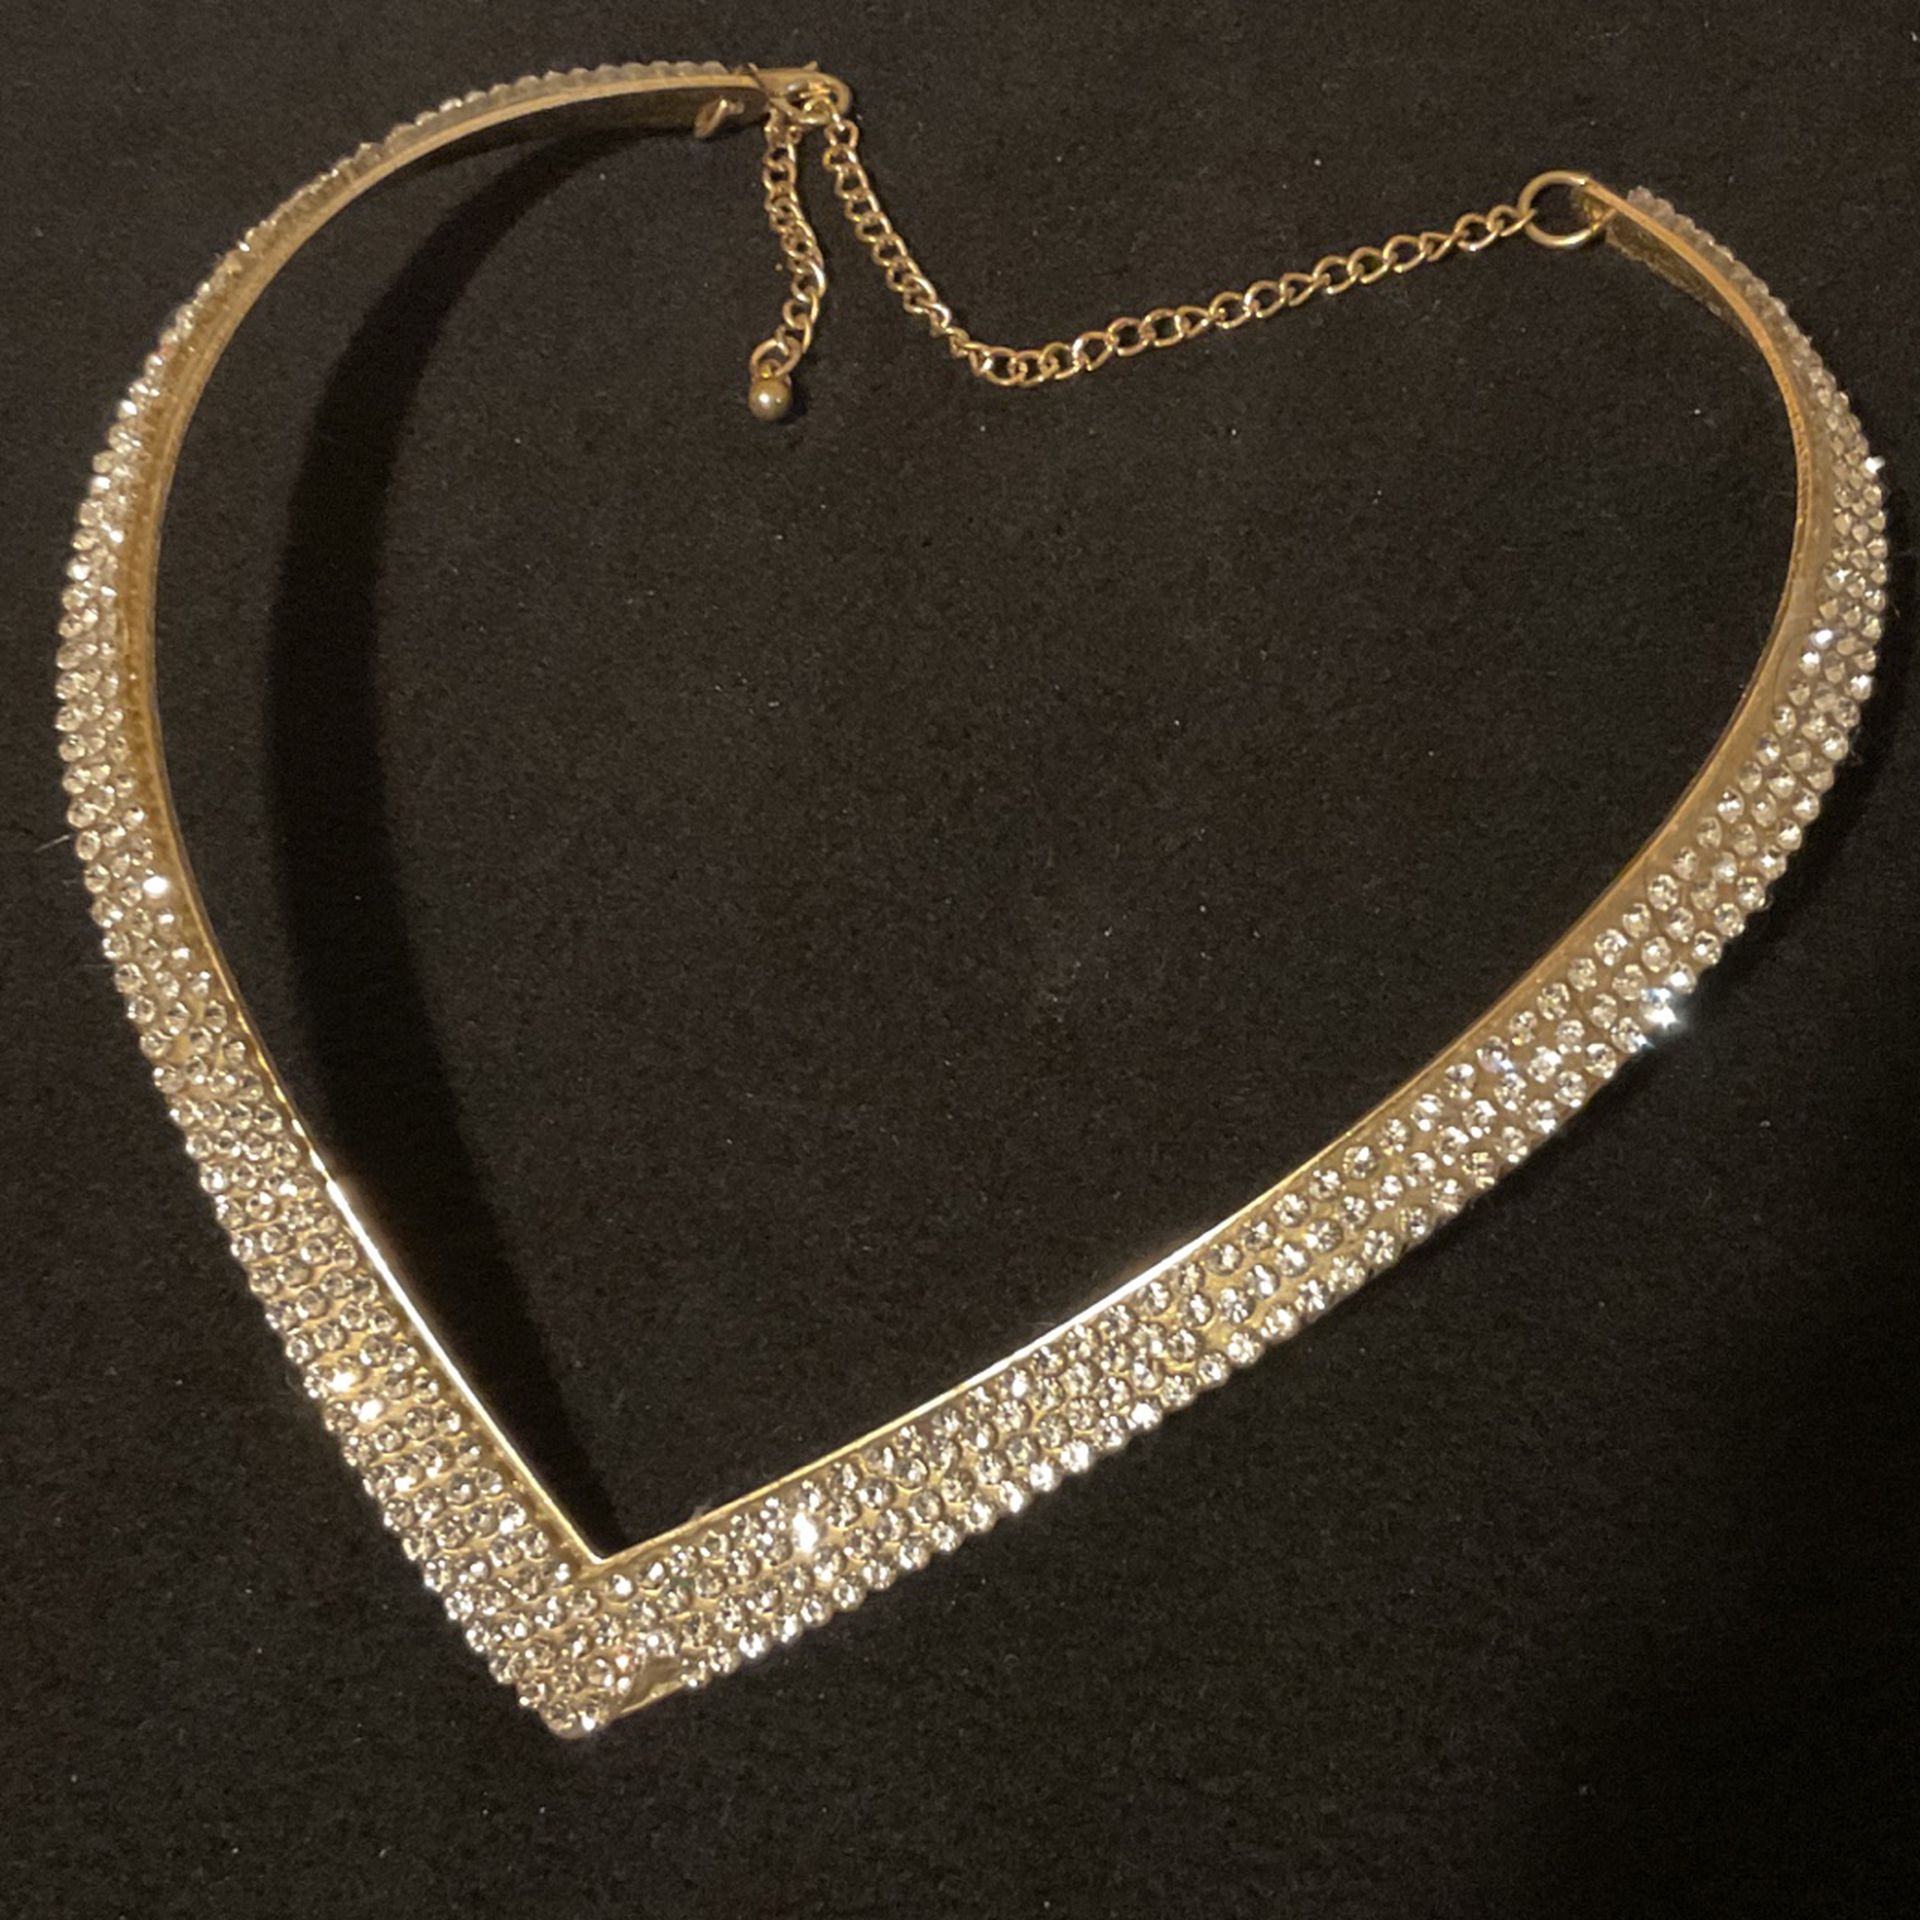 Goldtone Heart Shaped Choker With Sparkly Rhinestones  And Adjustable Chain